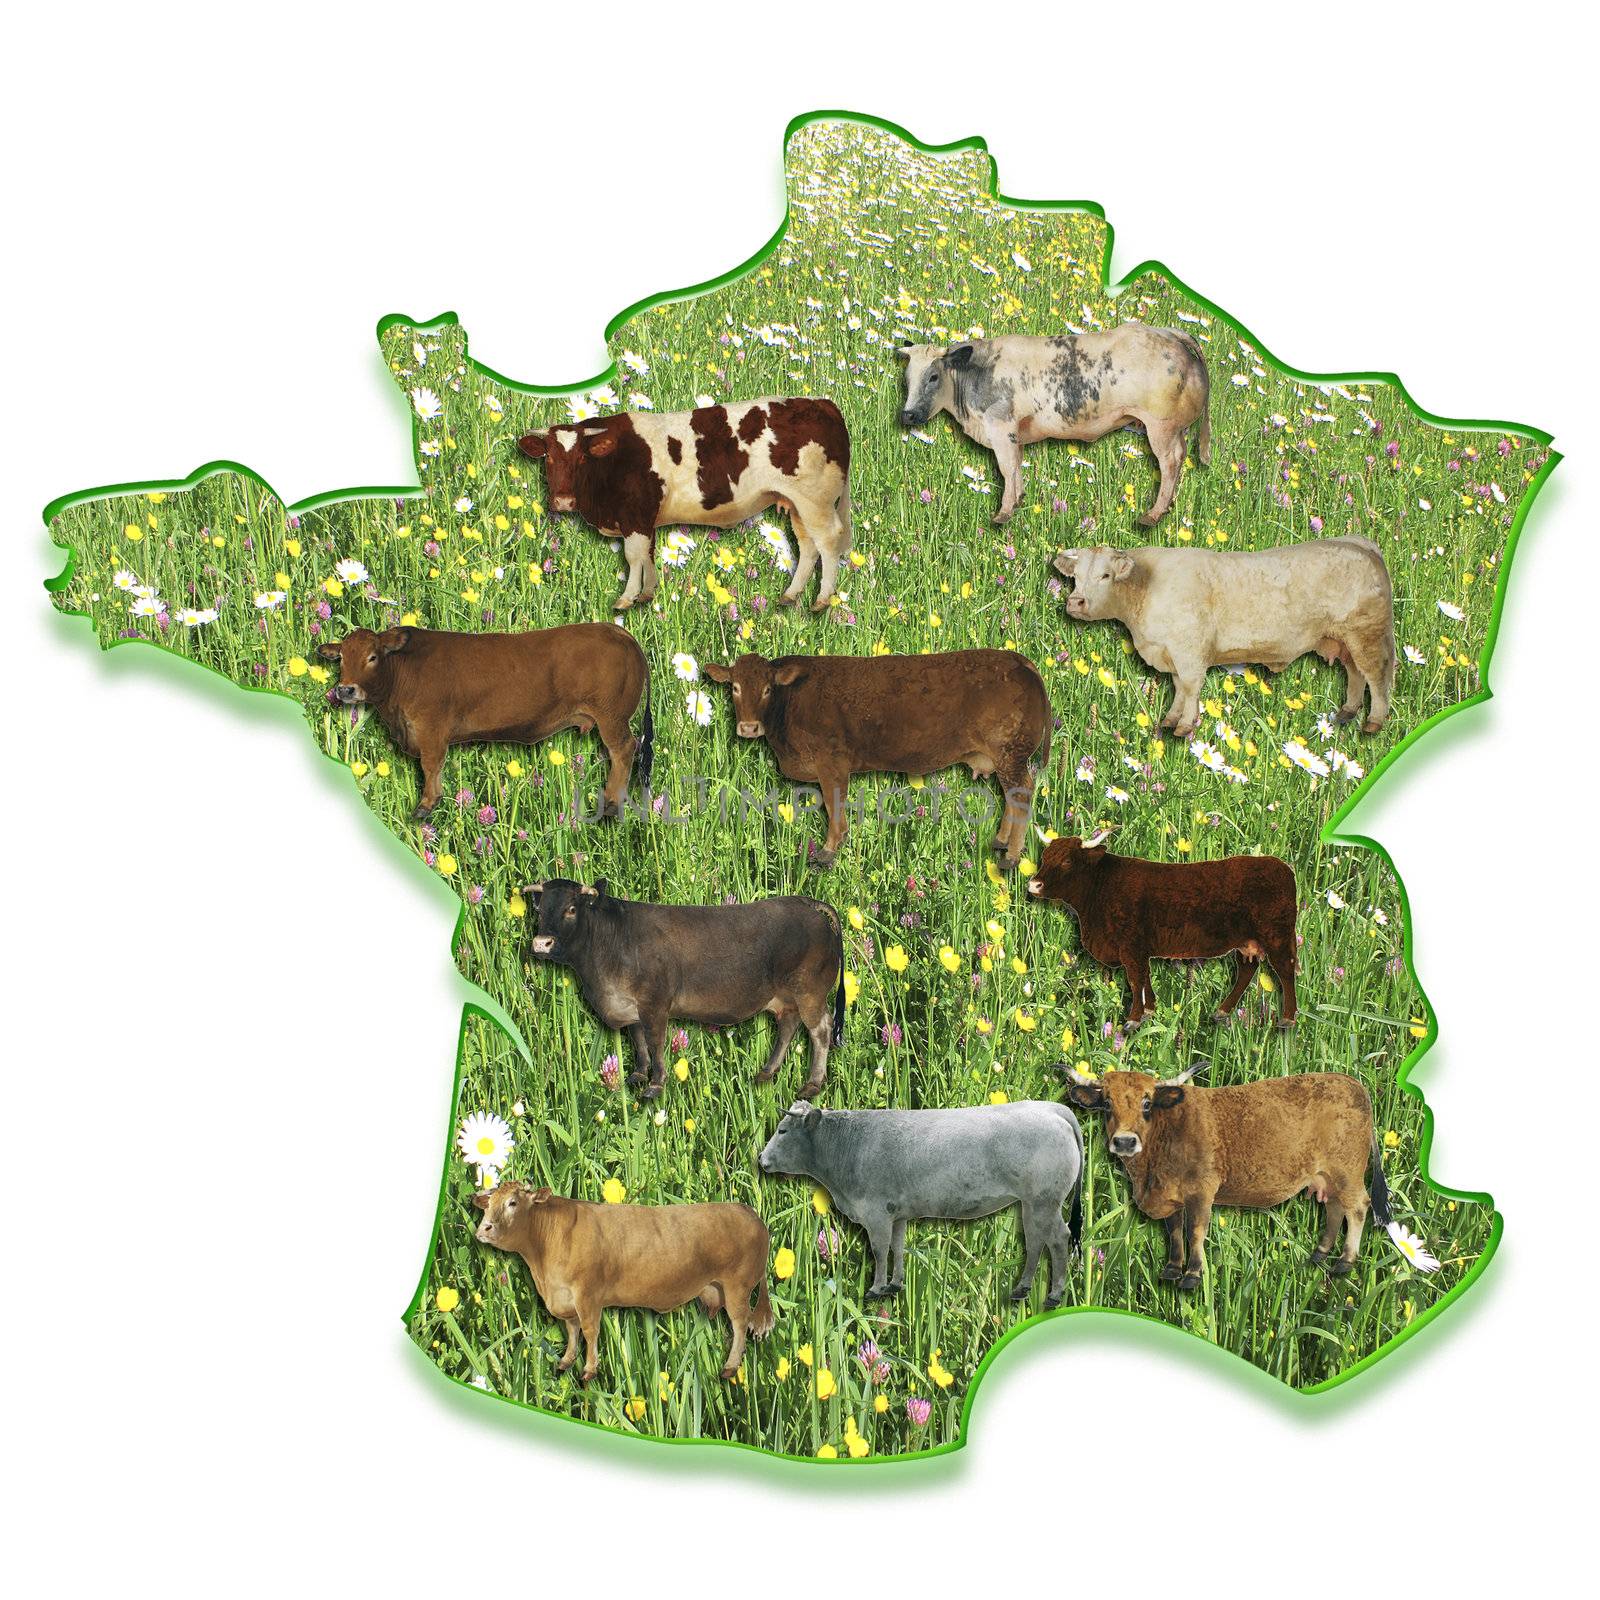 Cows on a map of France by 26amandine